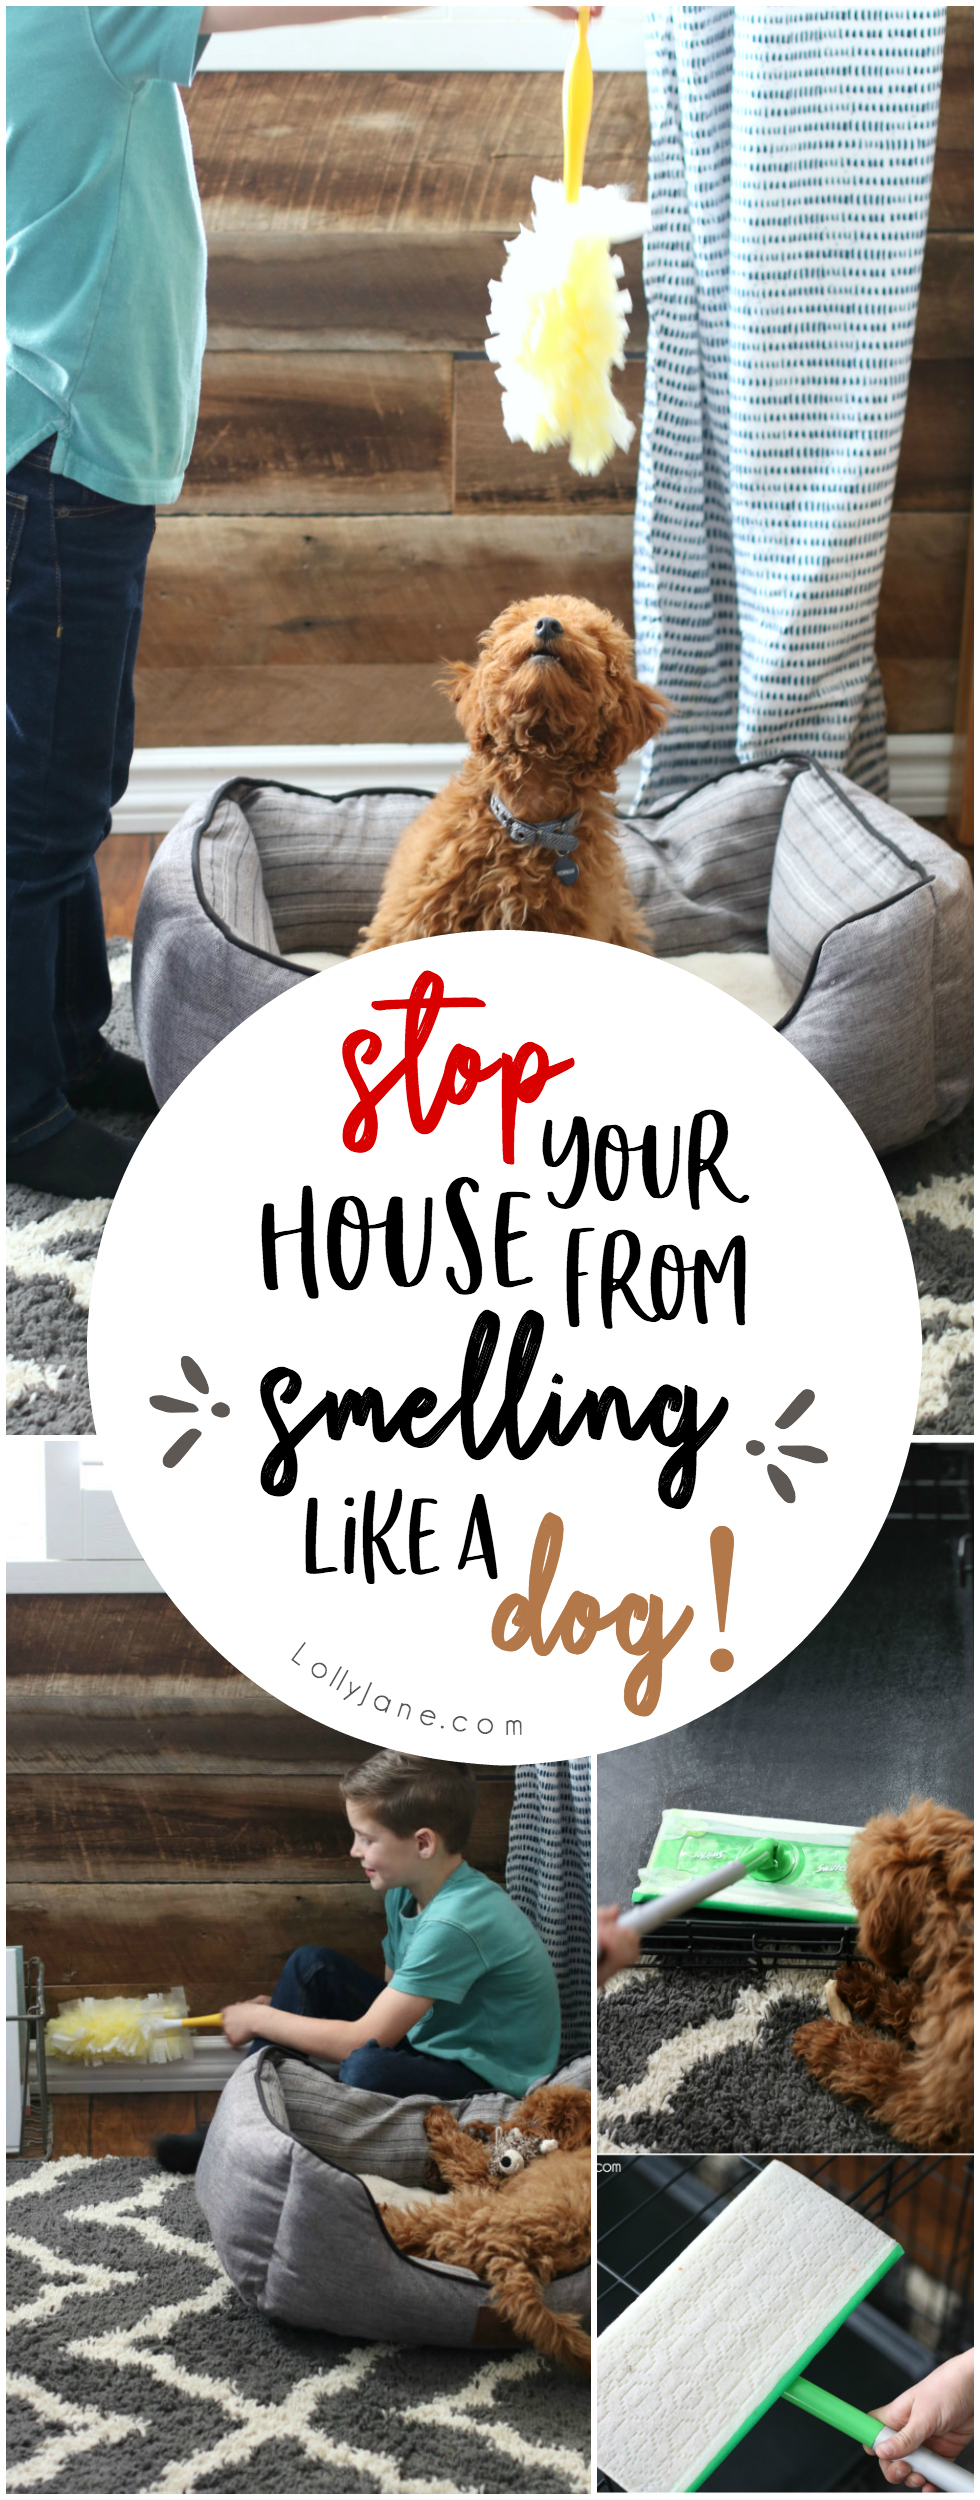 Have a pet or thinking about getting one? Check out these great tips on keeping your house from smelling like you have one! #DontSweatYourPet #SwifferFanatic #pets #petsofpinterest #cleanallthethings #petcleaningremedy #swiffer